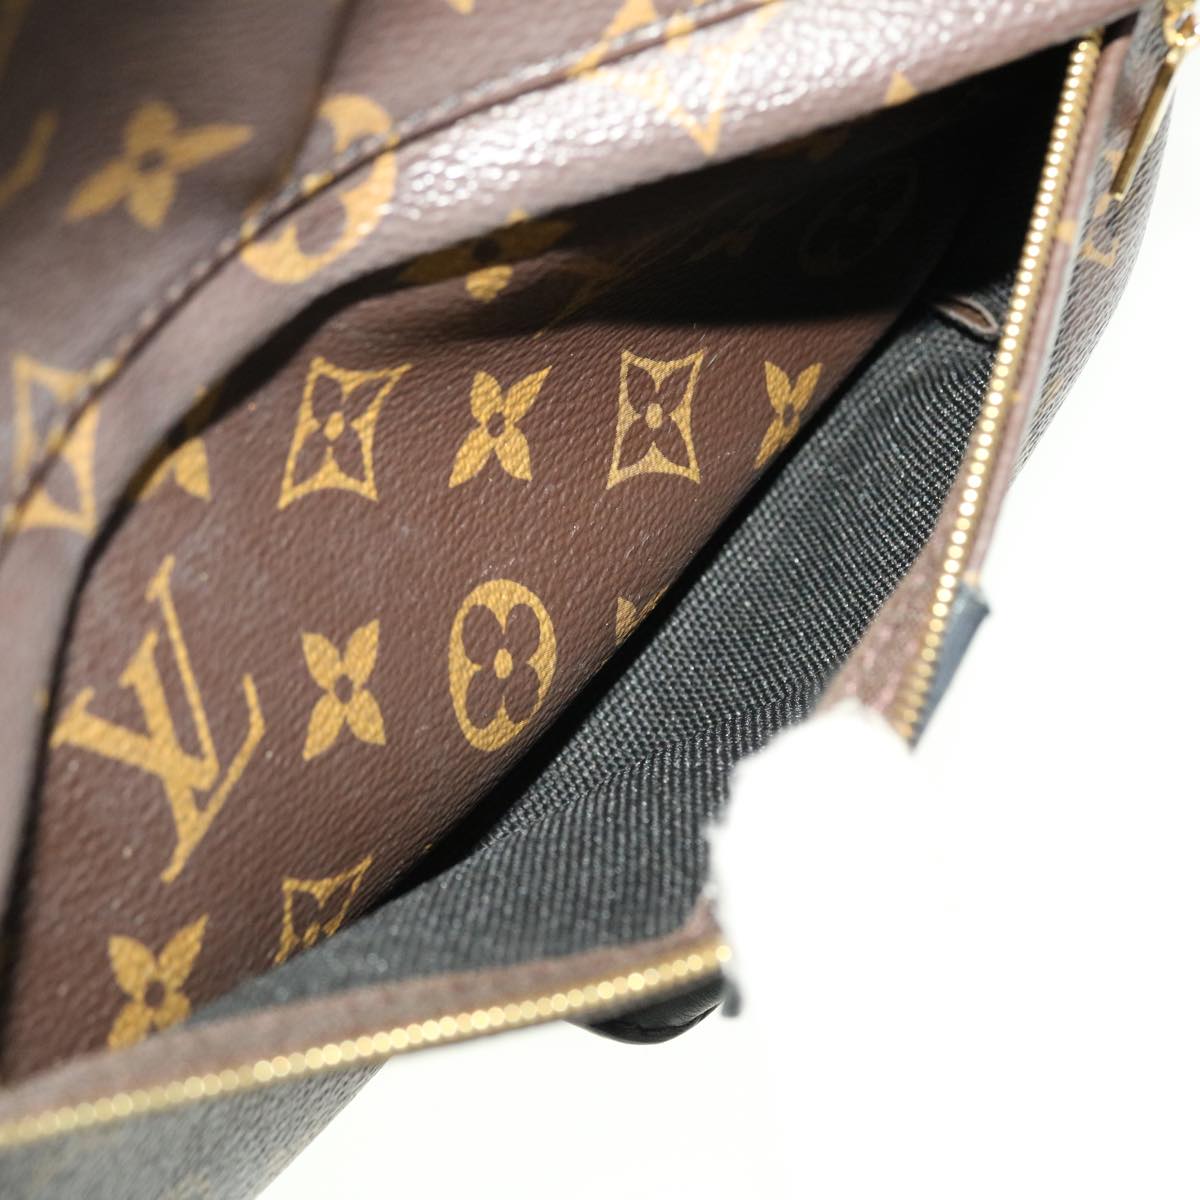 LOUIS VUITTON Monogram Palm Springs PM Backpack M41560 LV Auth 41103